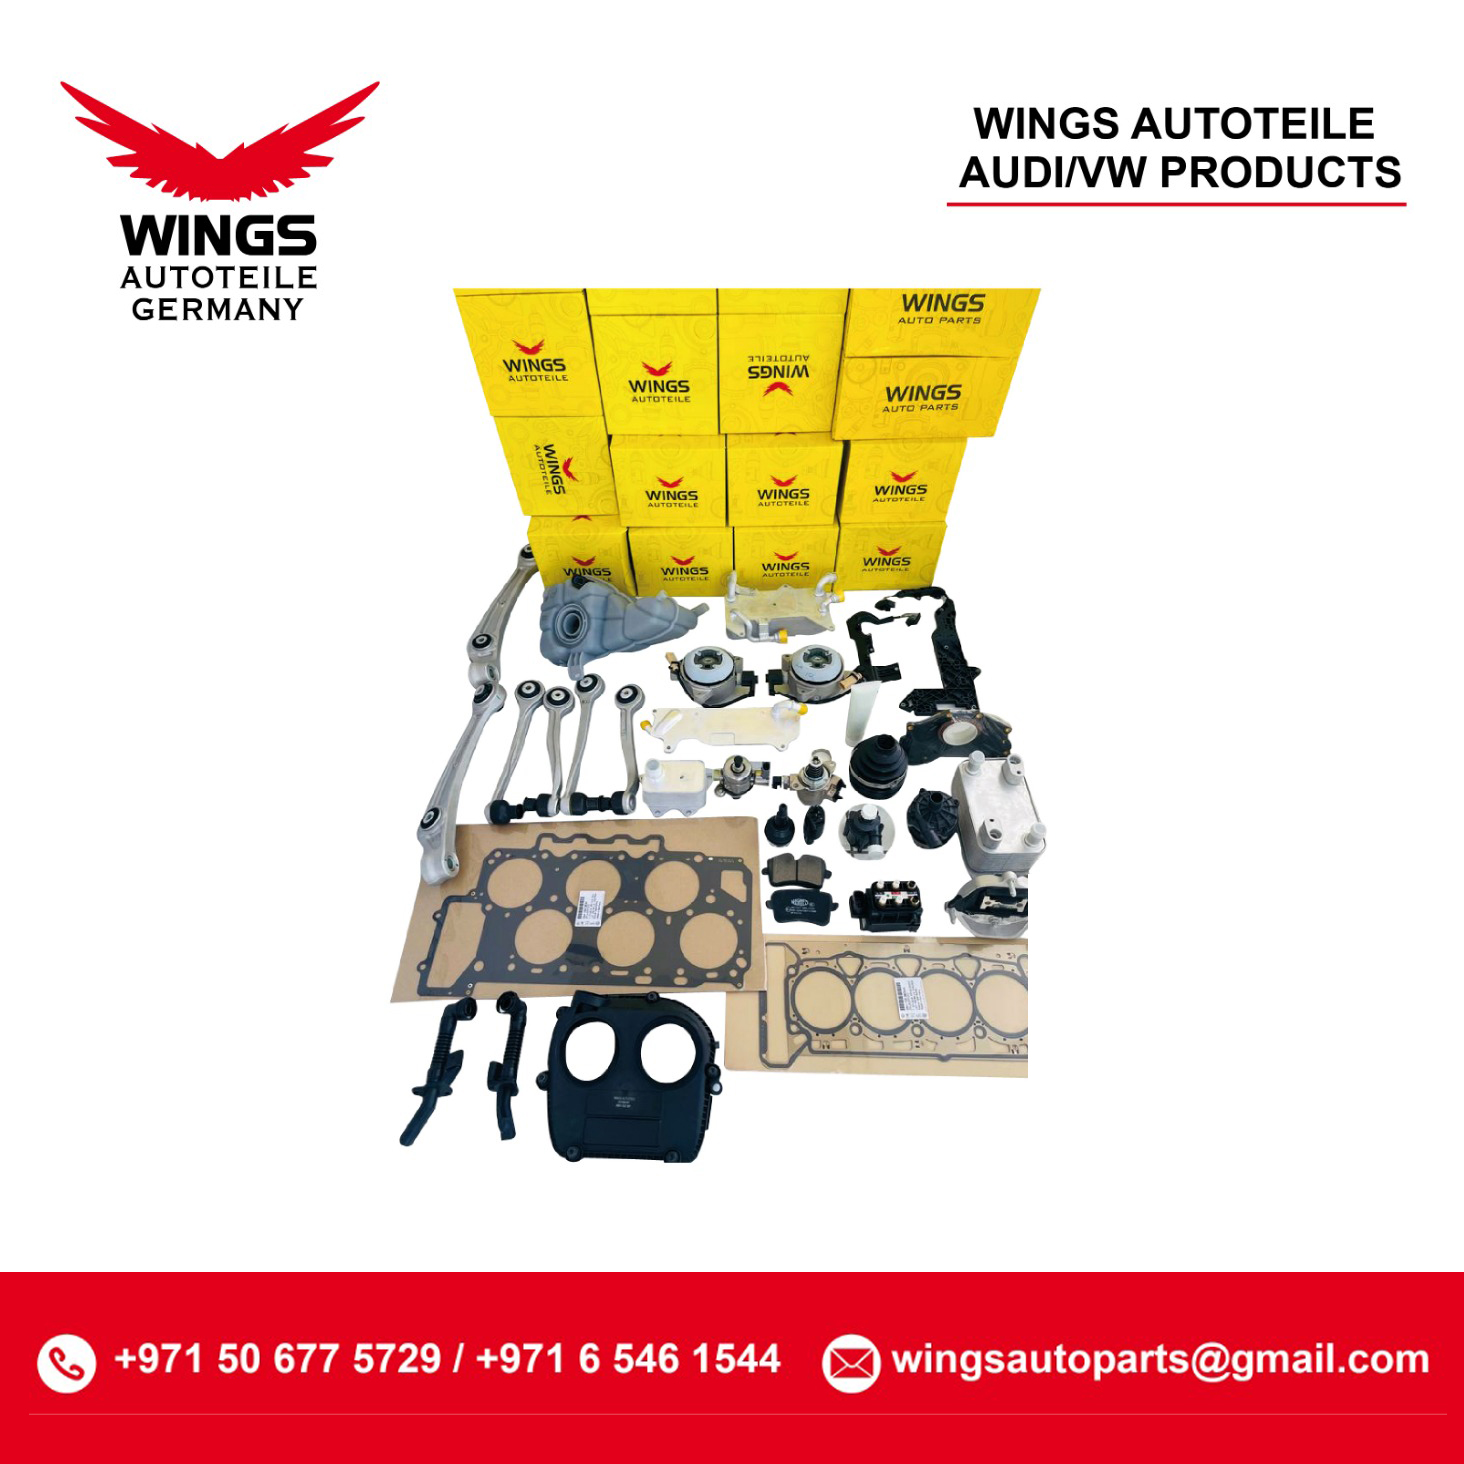 WINGS AUTOTEILE AUDI VW PRODUCTS IN UAE